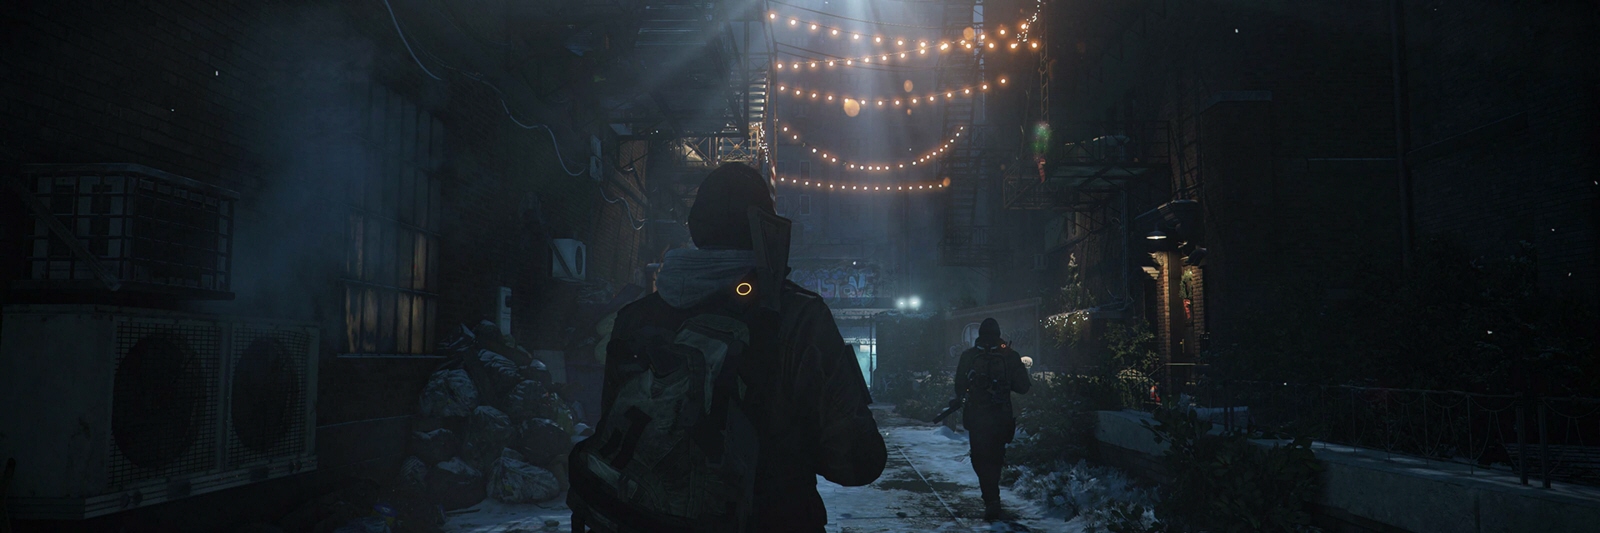 Screenshot from the game Tom Clancy's The Division